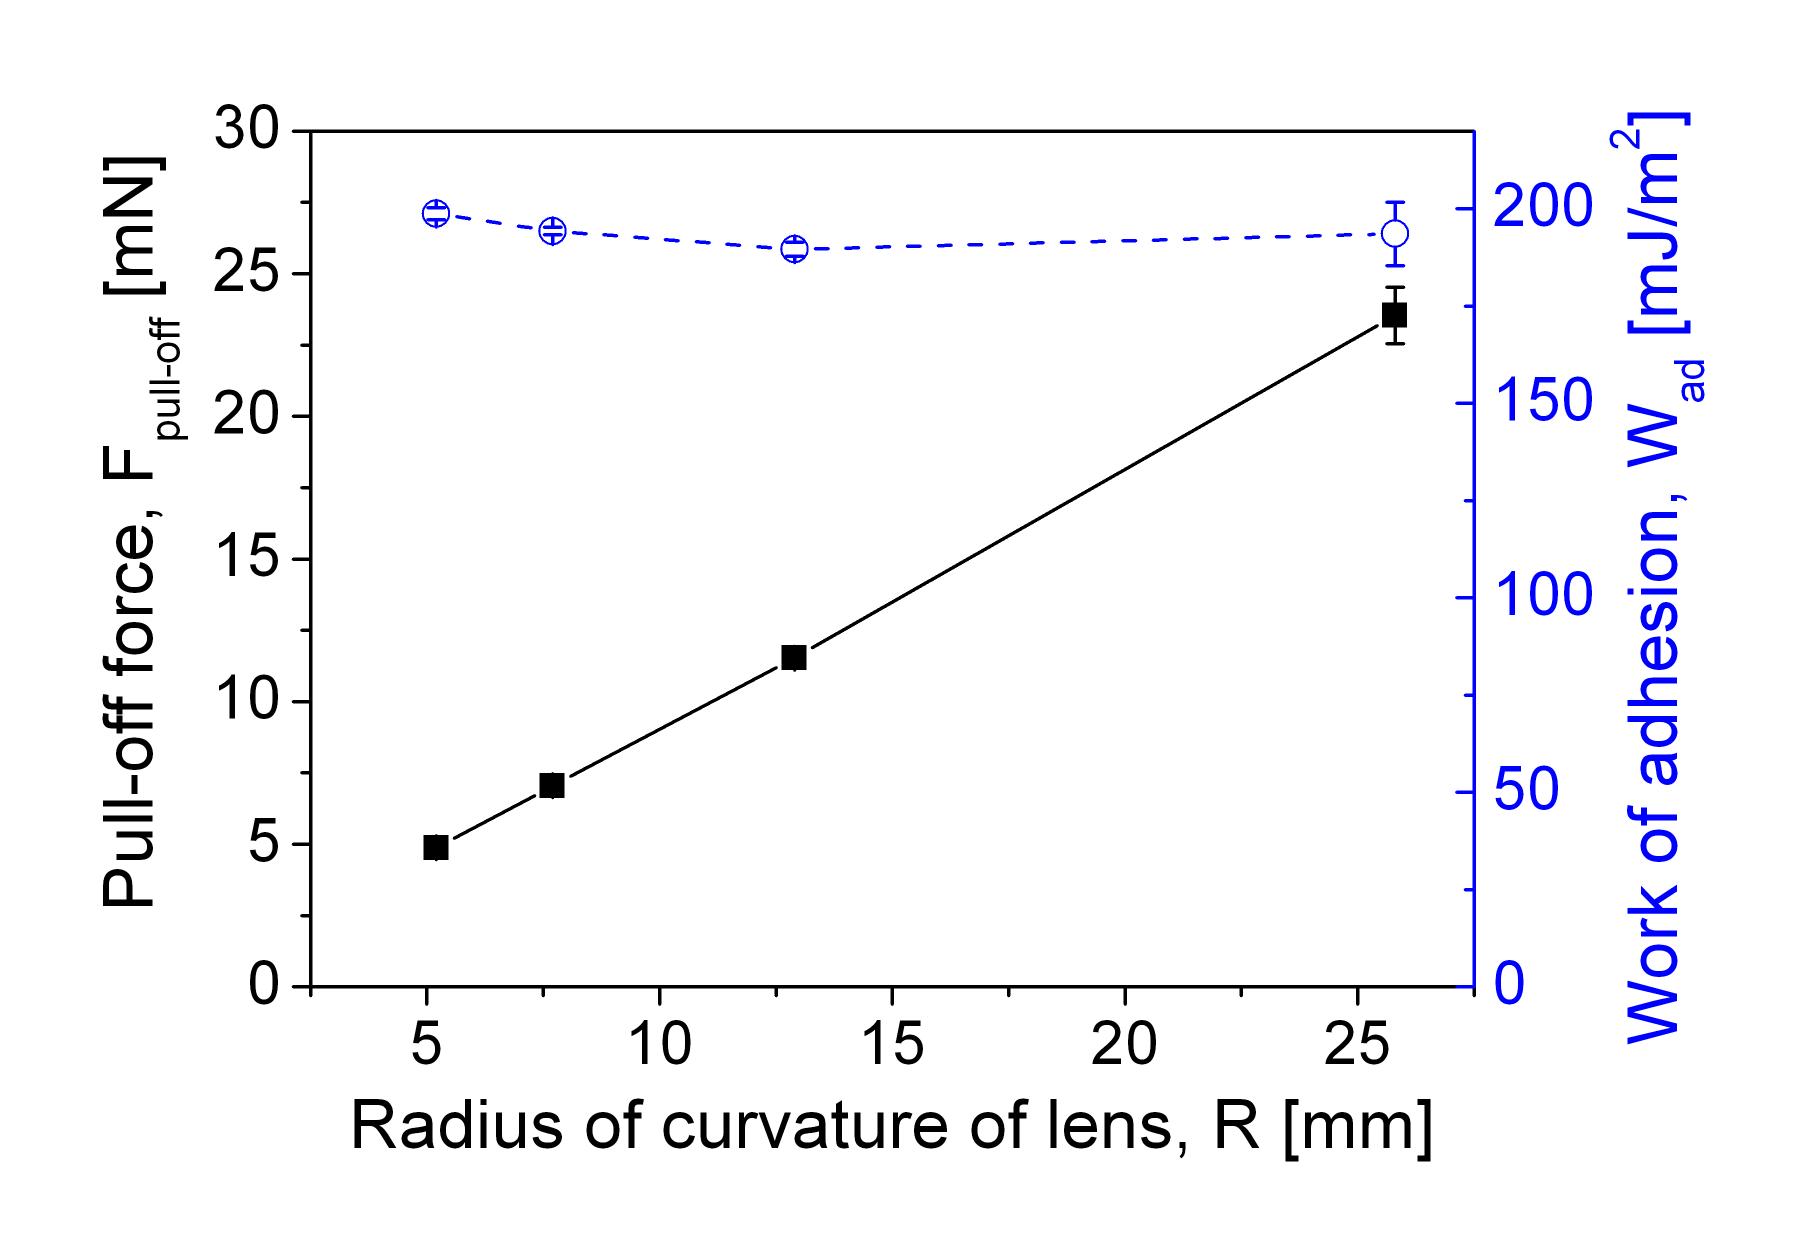 Pull-off force and work of adhesion as functions of the lens radii on a flat sample surface.